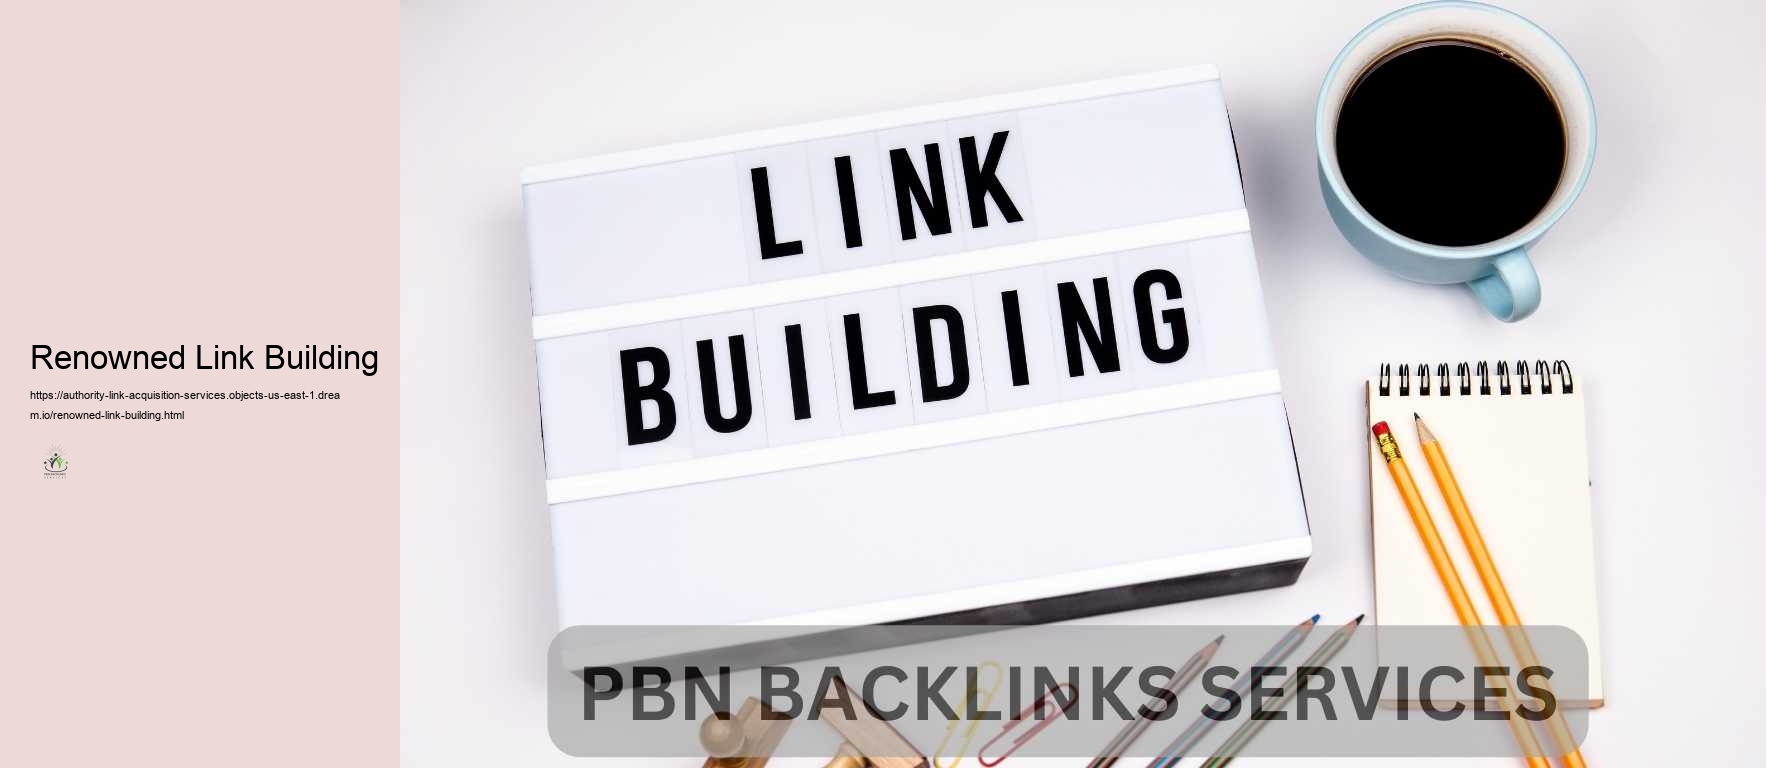 Renowned Link Building